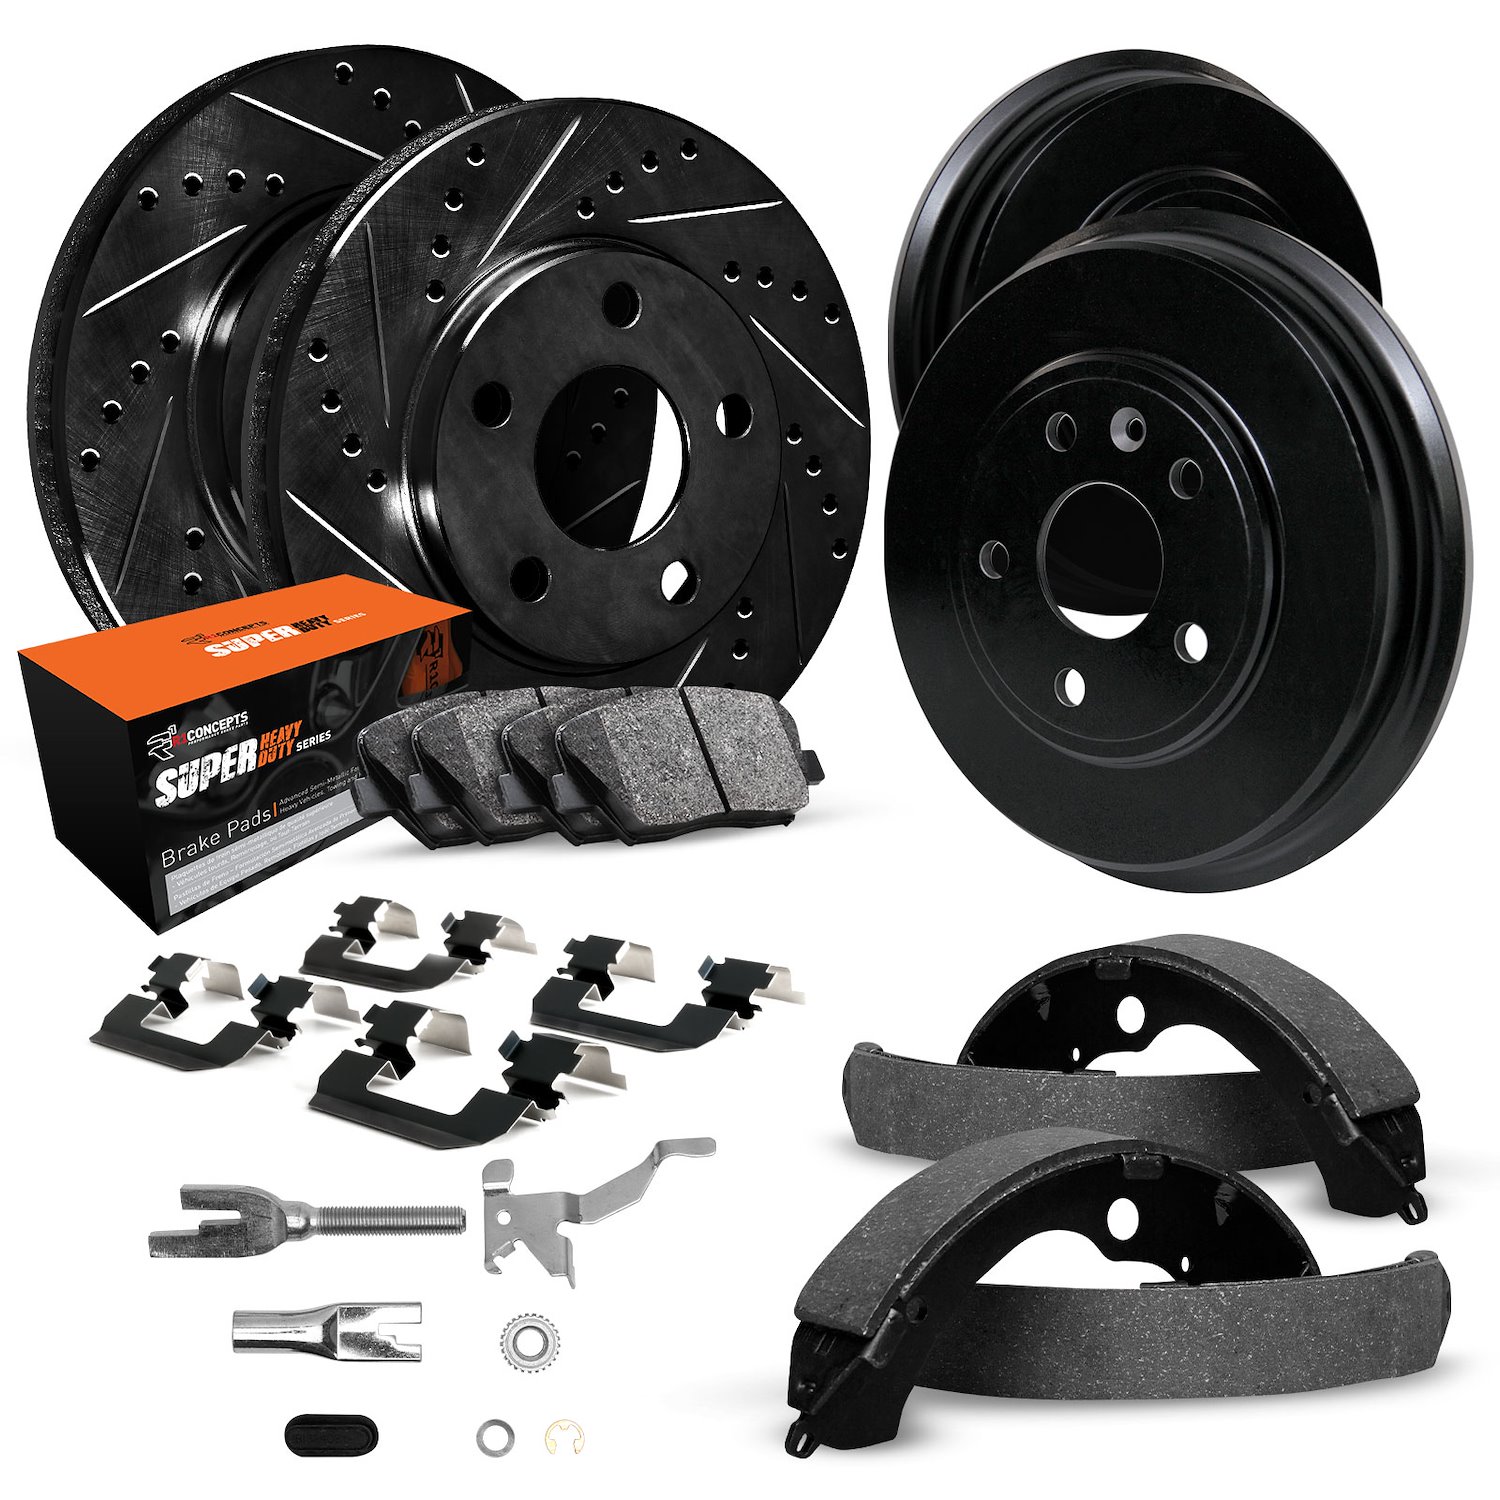 E-Line Drilled/Slotted Black Rotor & Drum Set w/Super-Duty Pads, Shoes, Hardware/Adjusters, 1984-1985 Ford/Lincoln/Mercury/Mazda